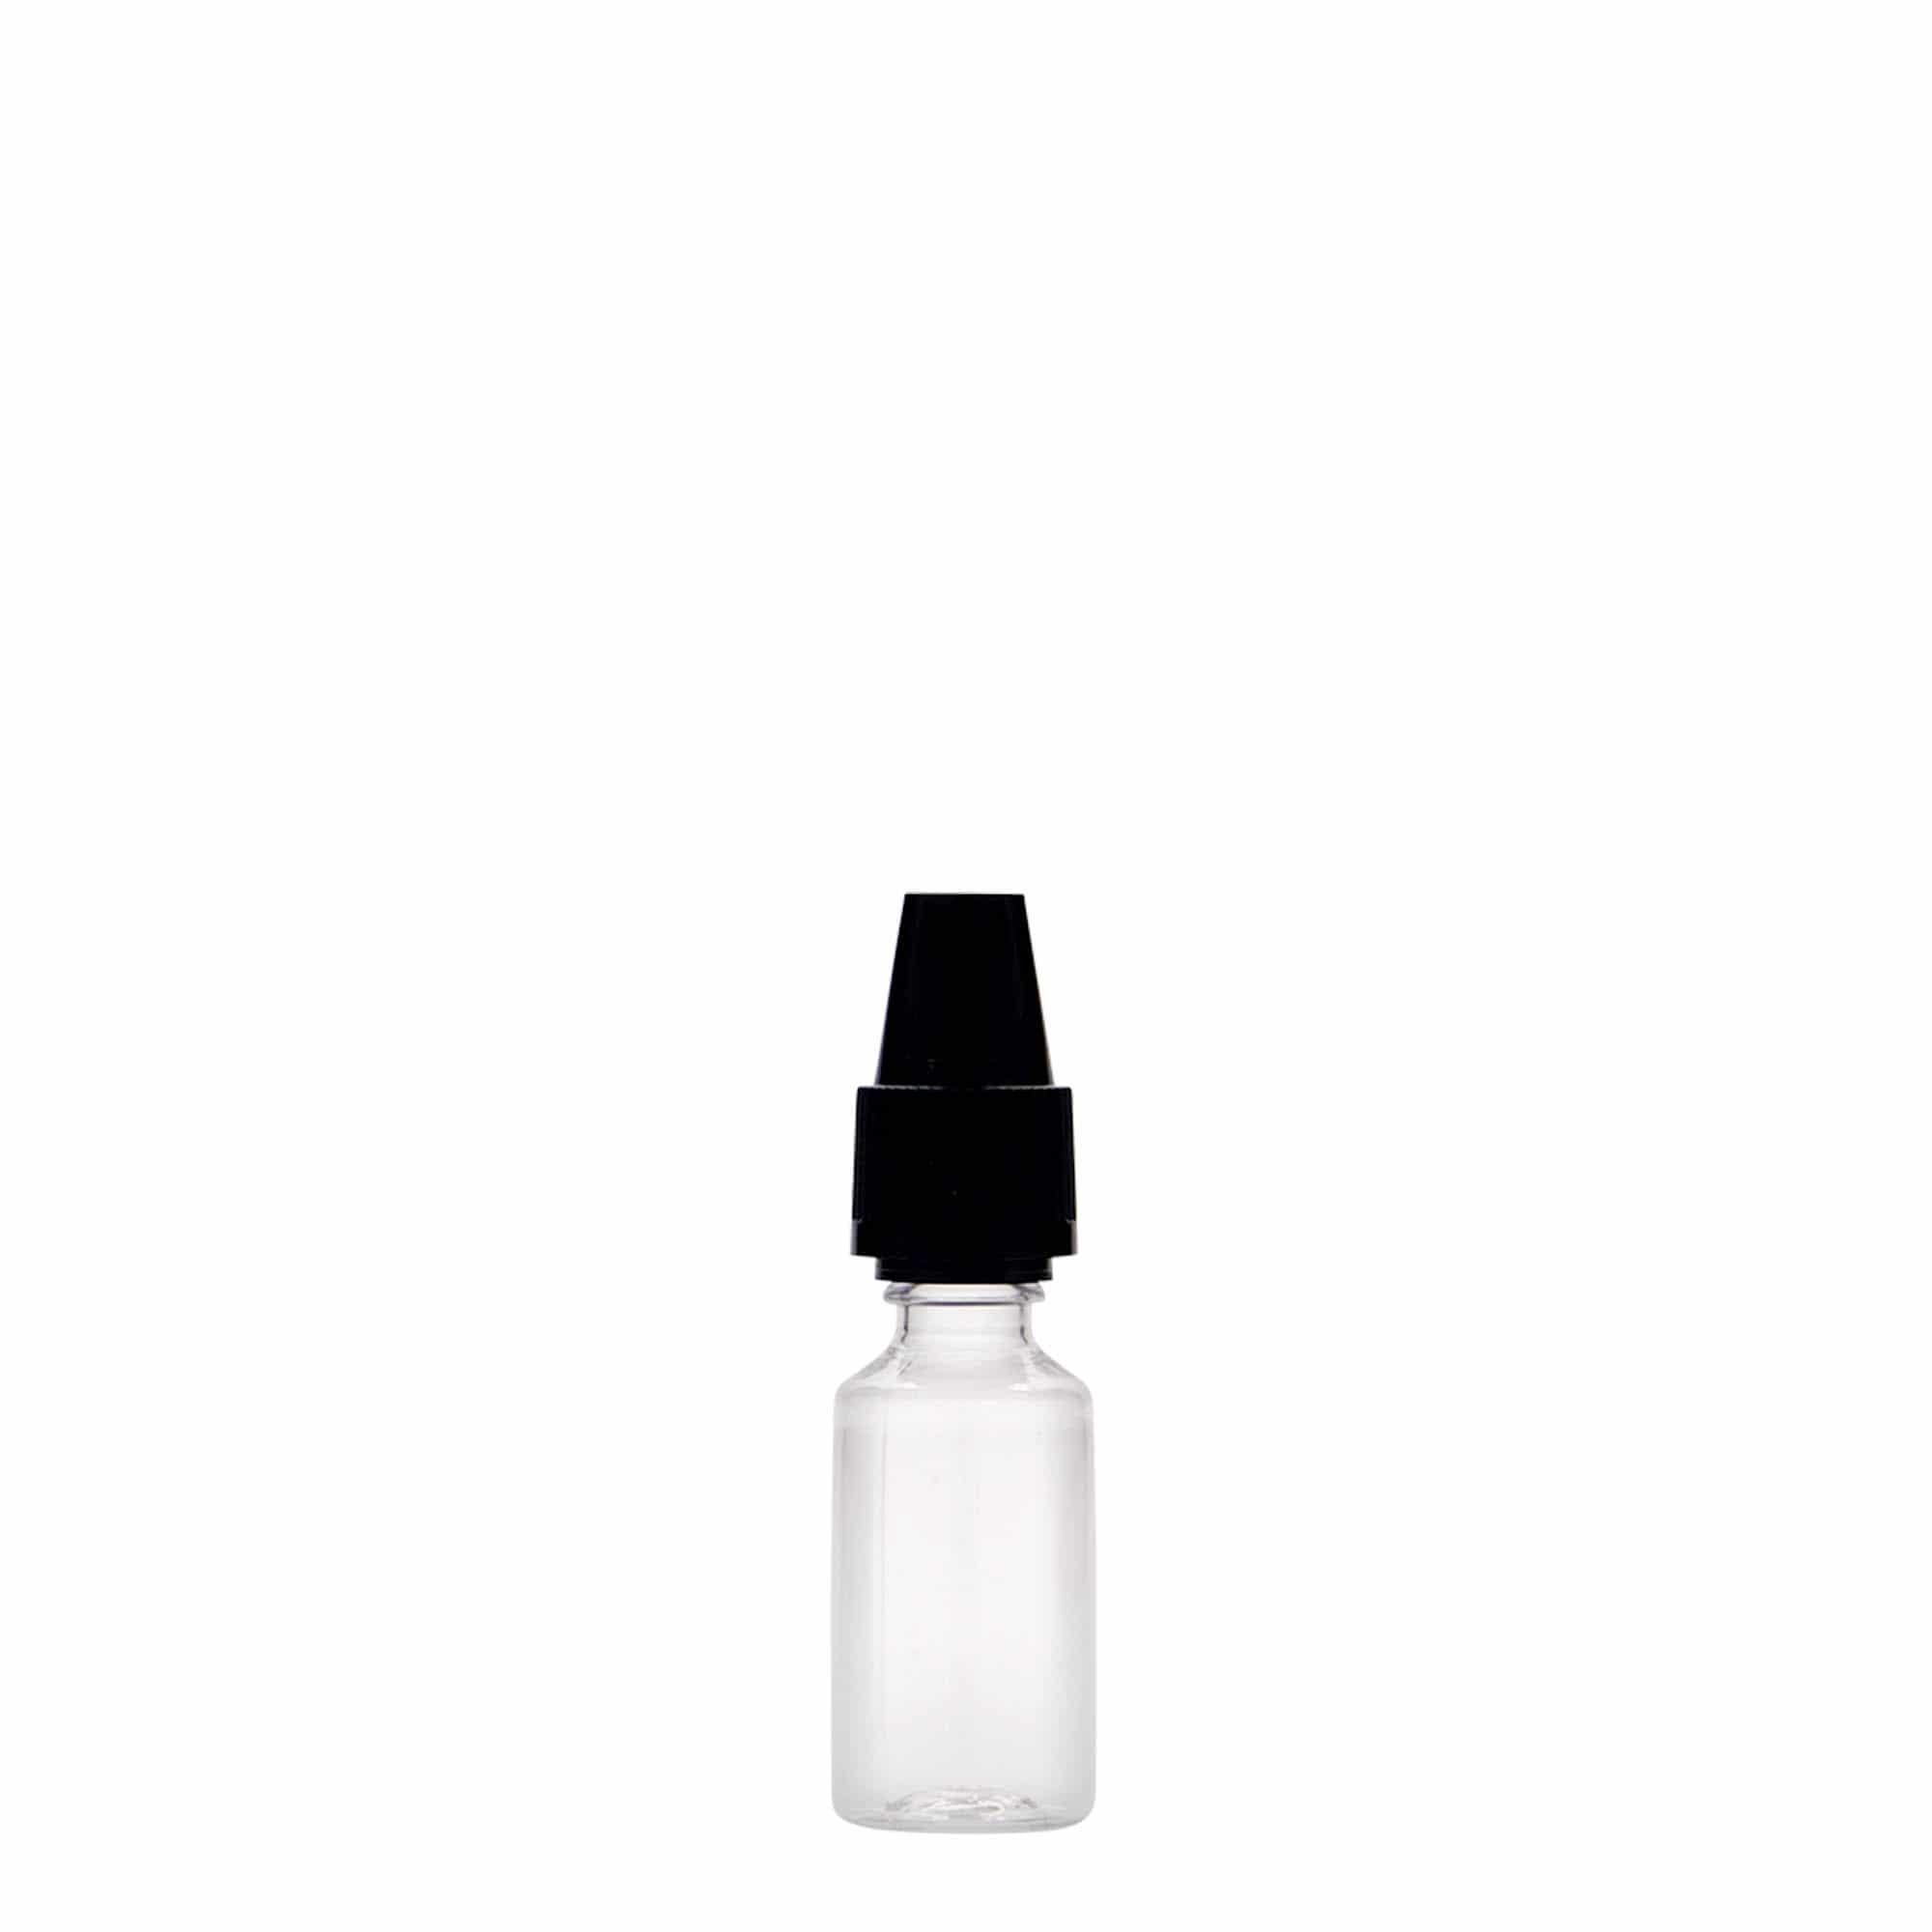 10 ml PET bottle 'E-Liquid' with quality seal and child safety lock, plastic, closure: screw cap